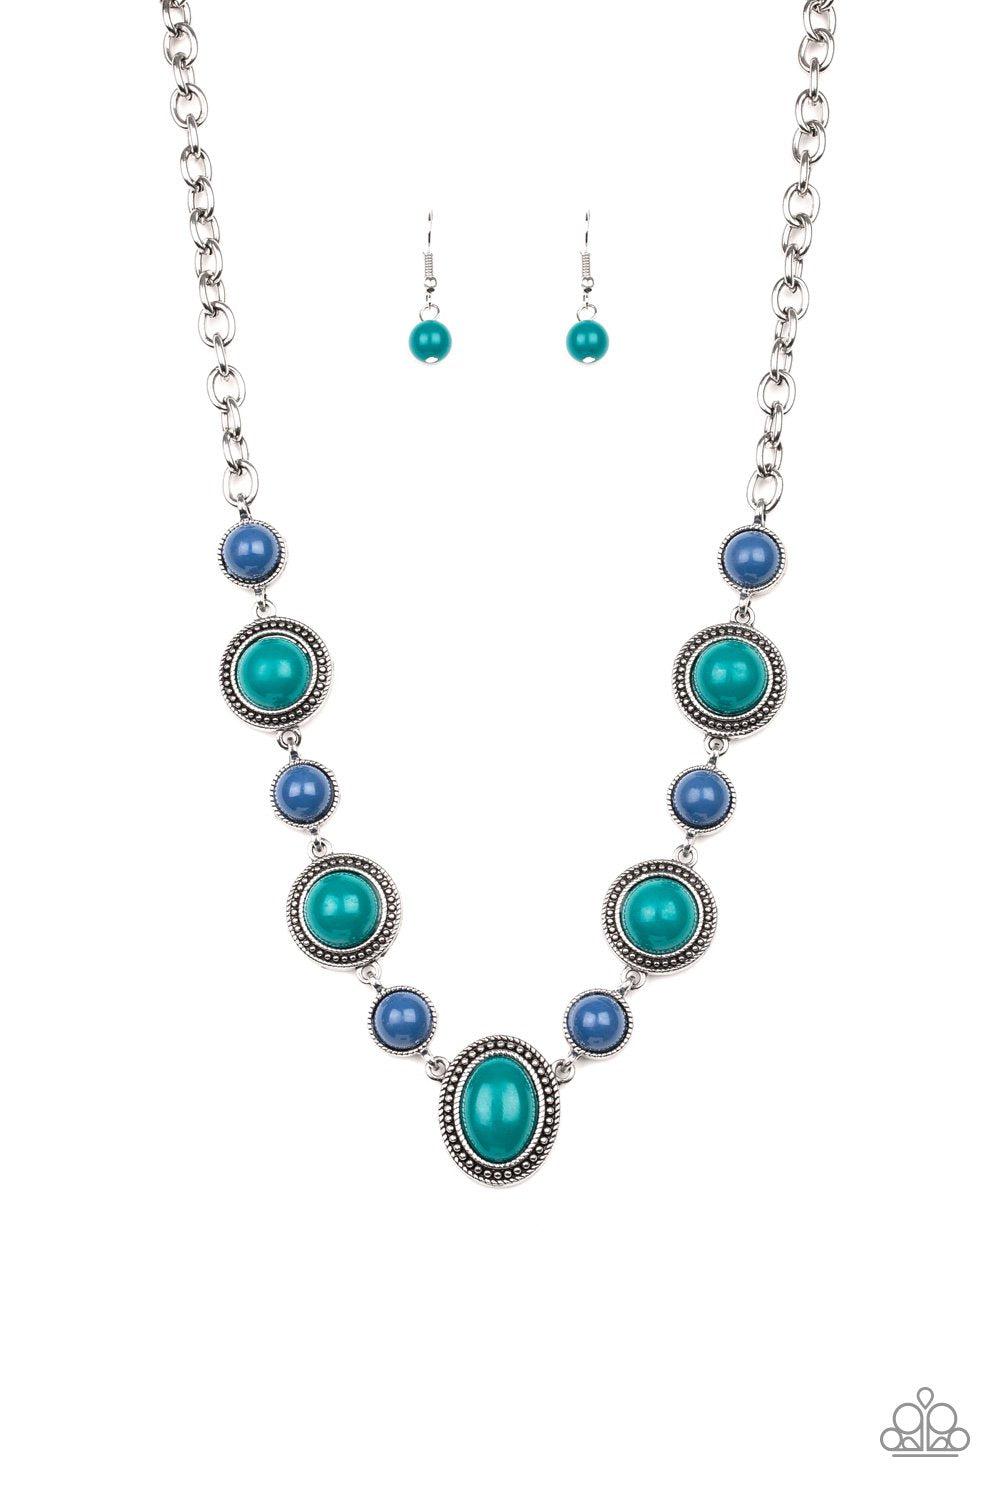 Voyager Vibes Blue and Green Necklace with matching Earrings - Paparazzi Accessories-CarasShop.com - $5 Jewelry by Cara Jewels